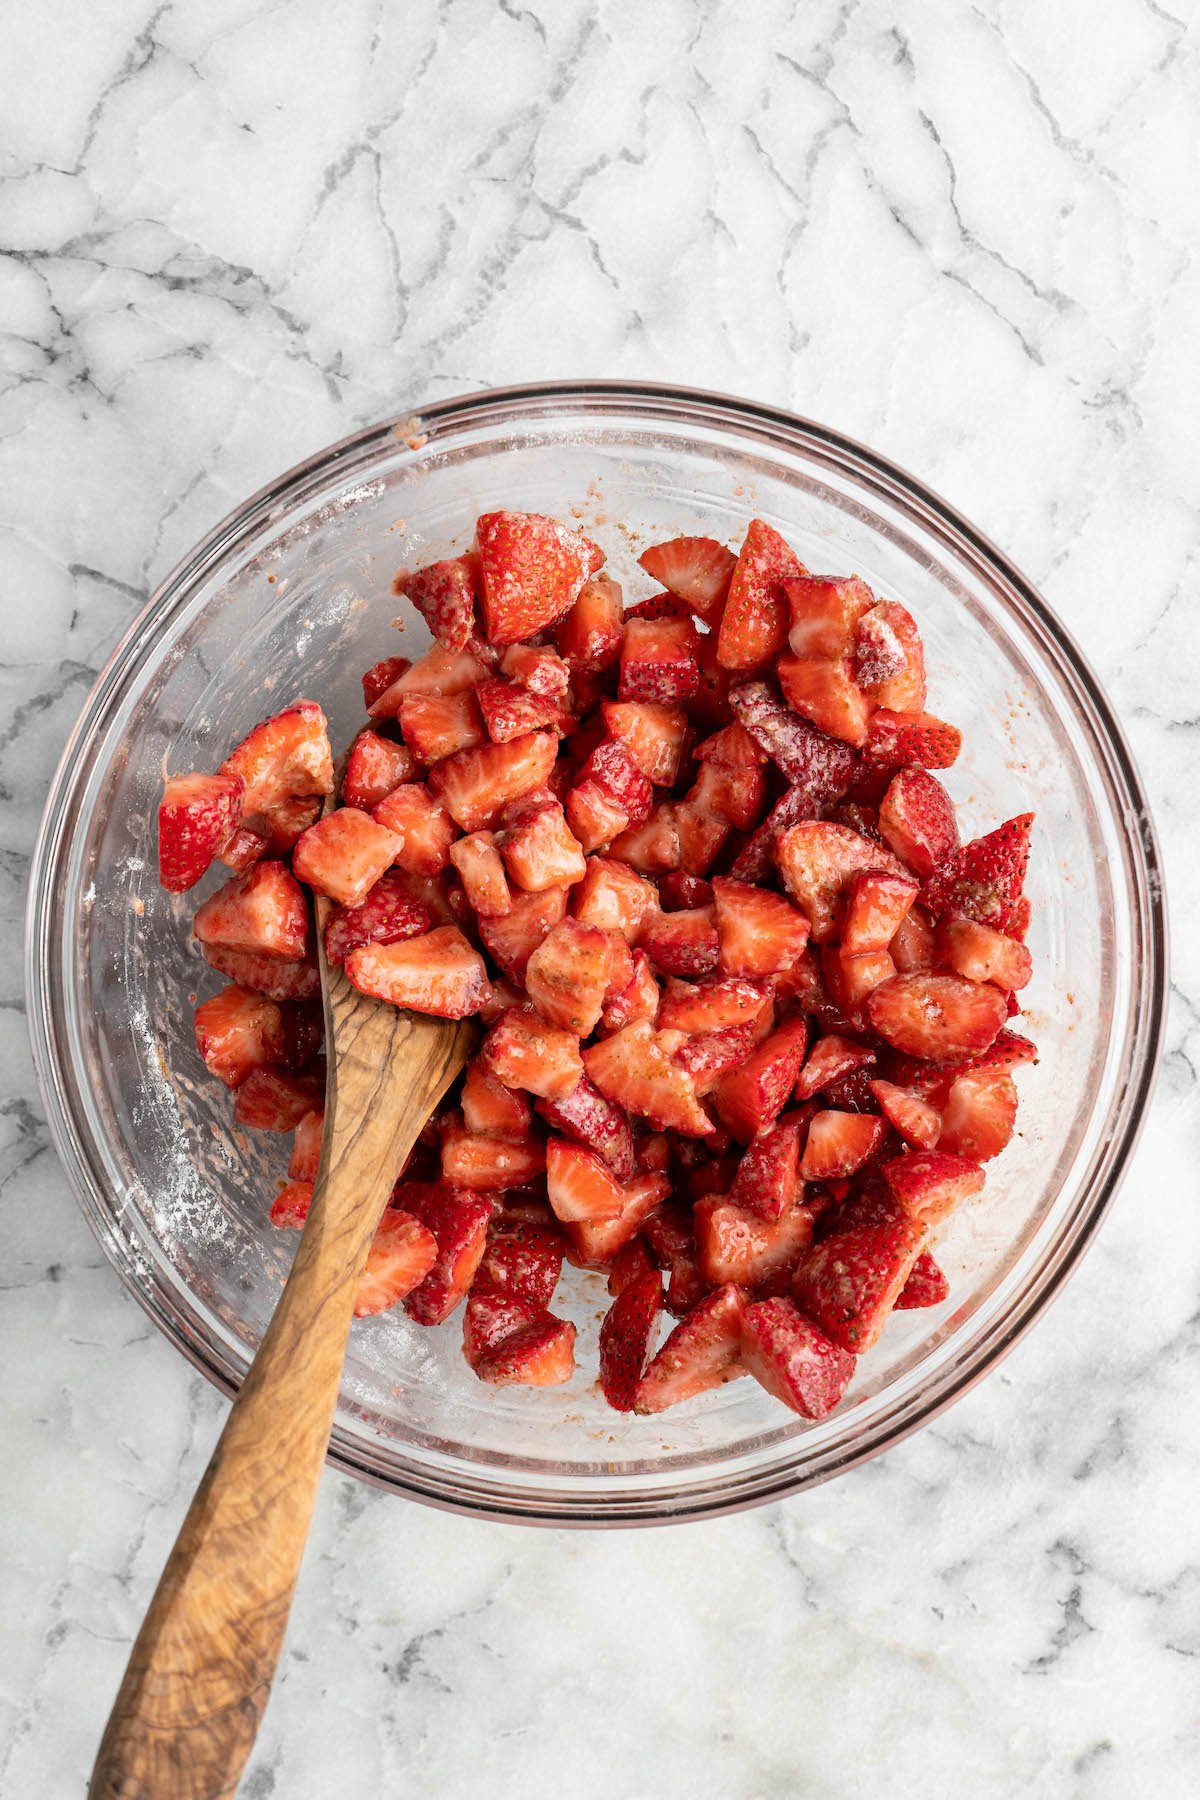 Overhead view of macerated strawberries in glass bowl with wooden spoon